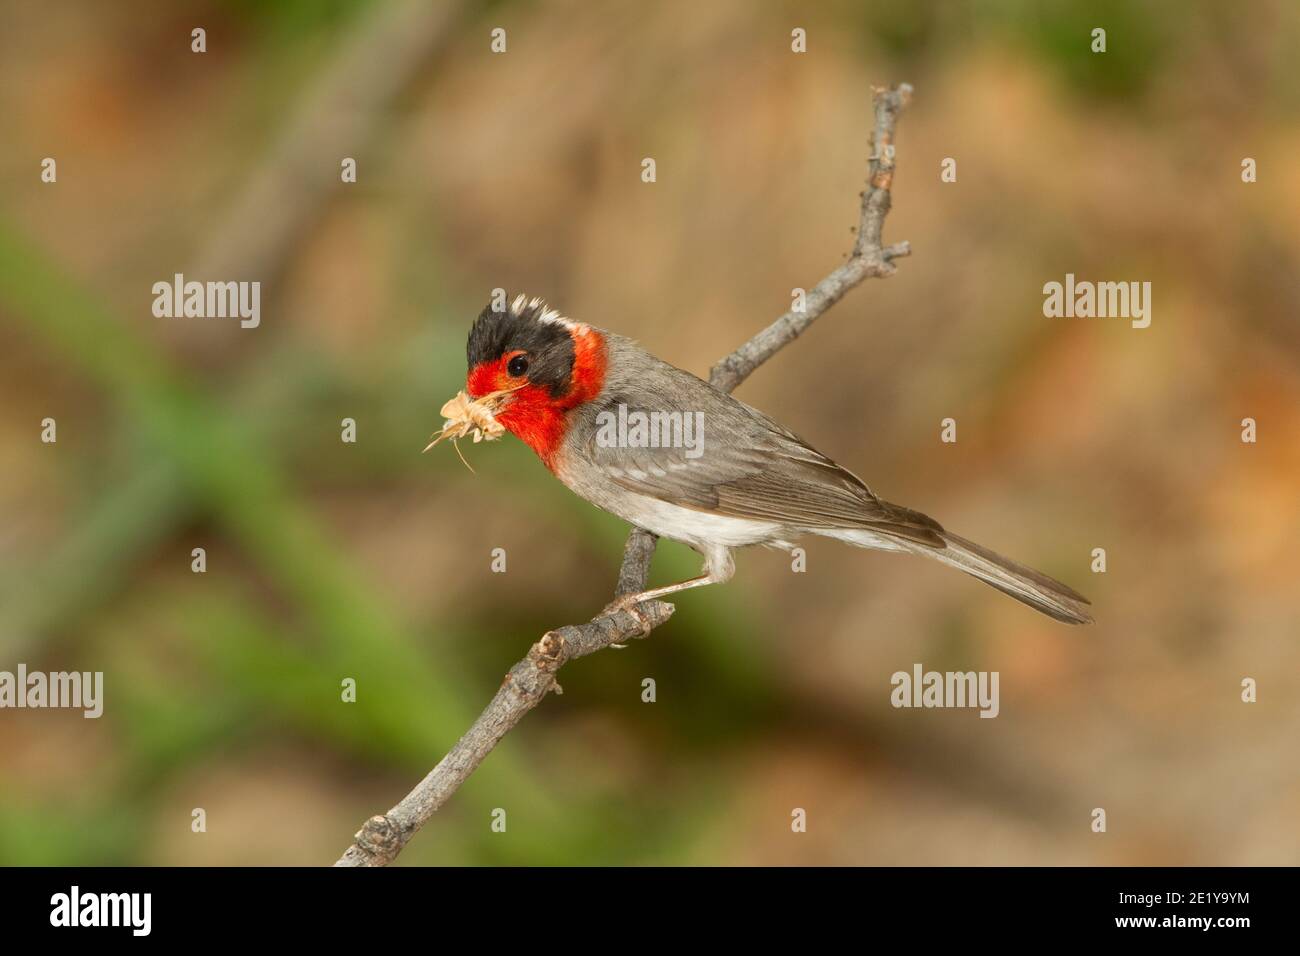 Warbler rosso, cardellina rubrifrons, con falena in becco. Foto Stock